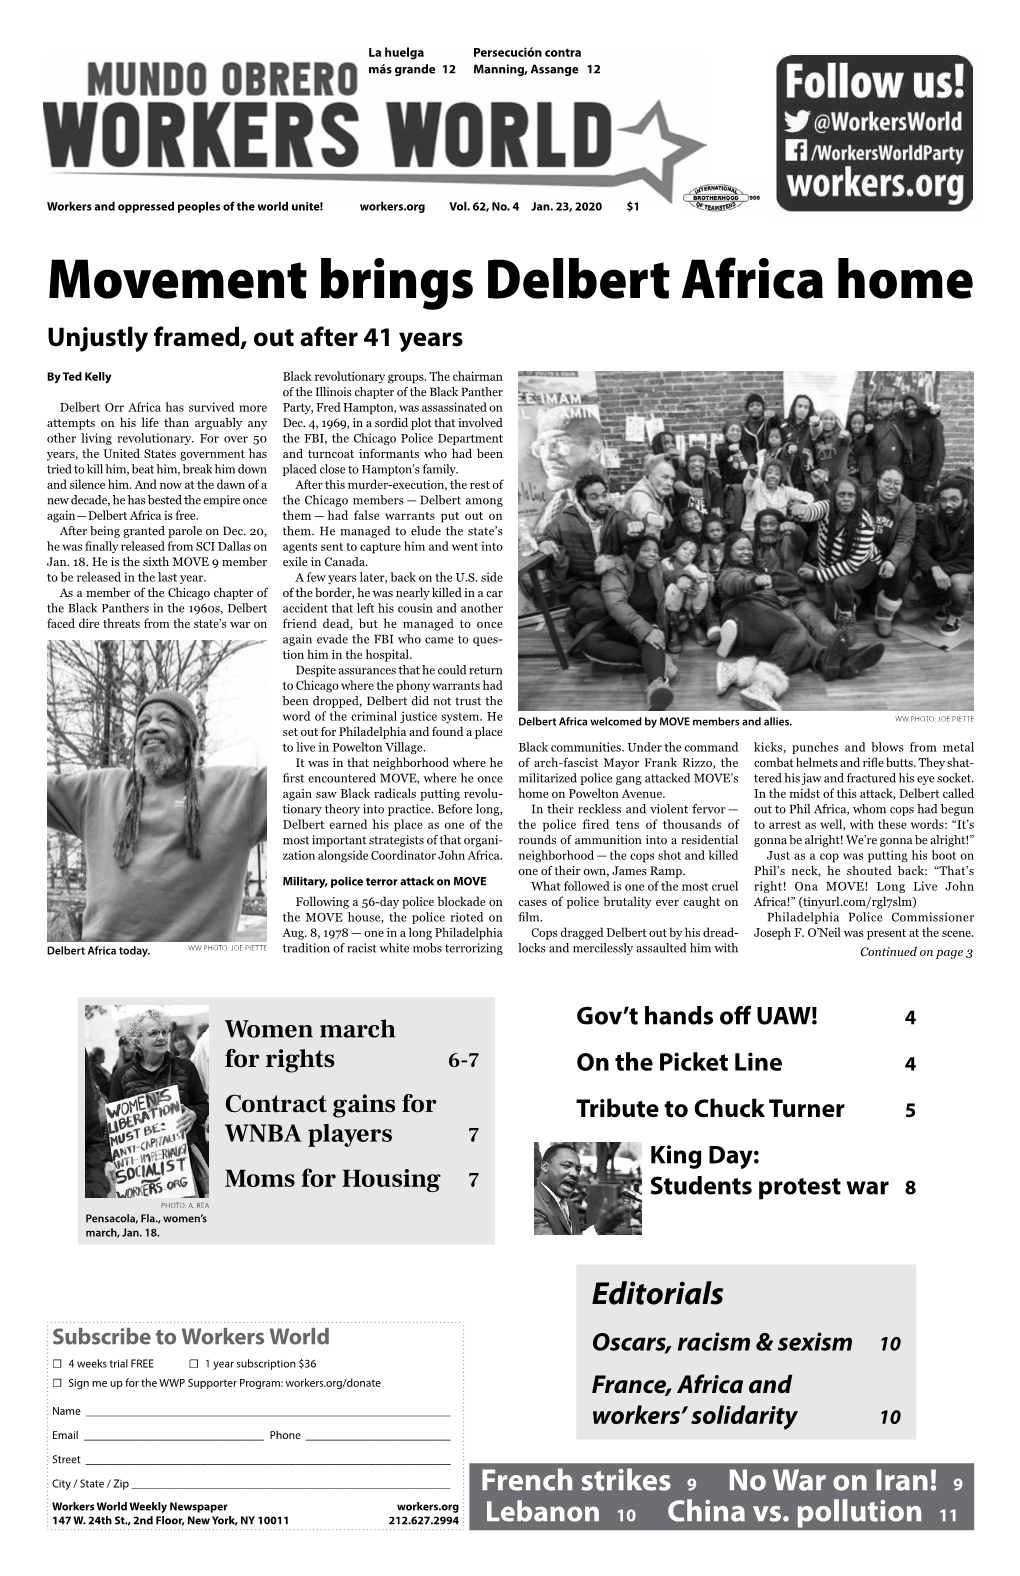 Jan. 23, 2020 $1 Movement Brings Delbert Africa Home Unjustly Framed, out After 41 Years